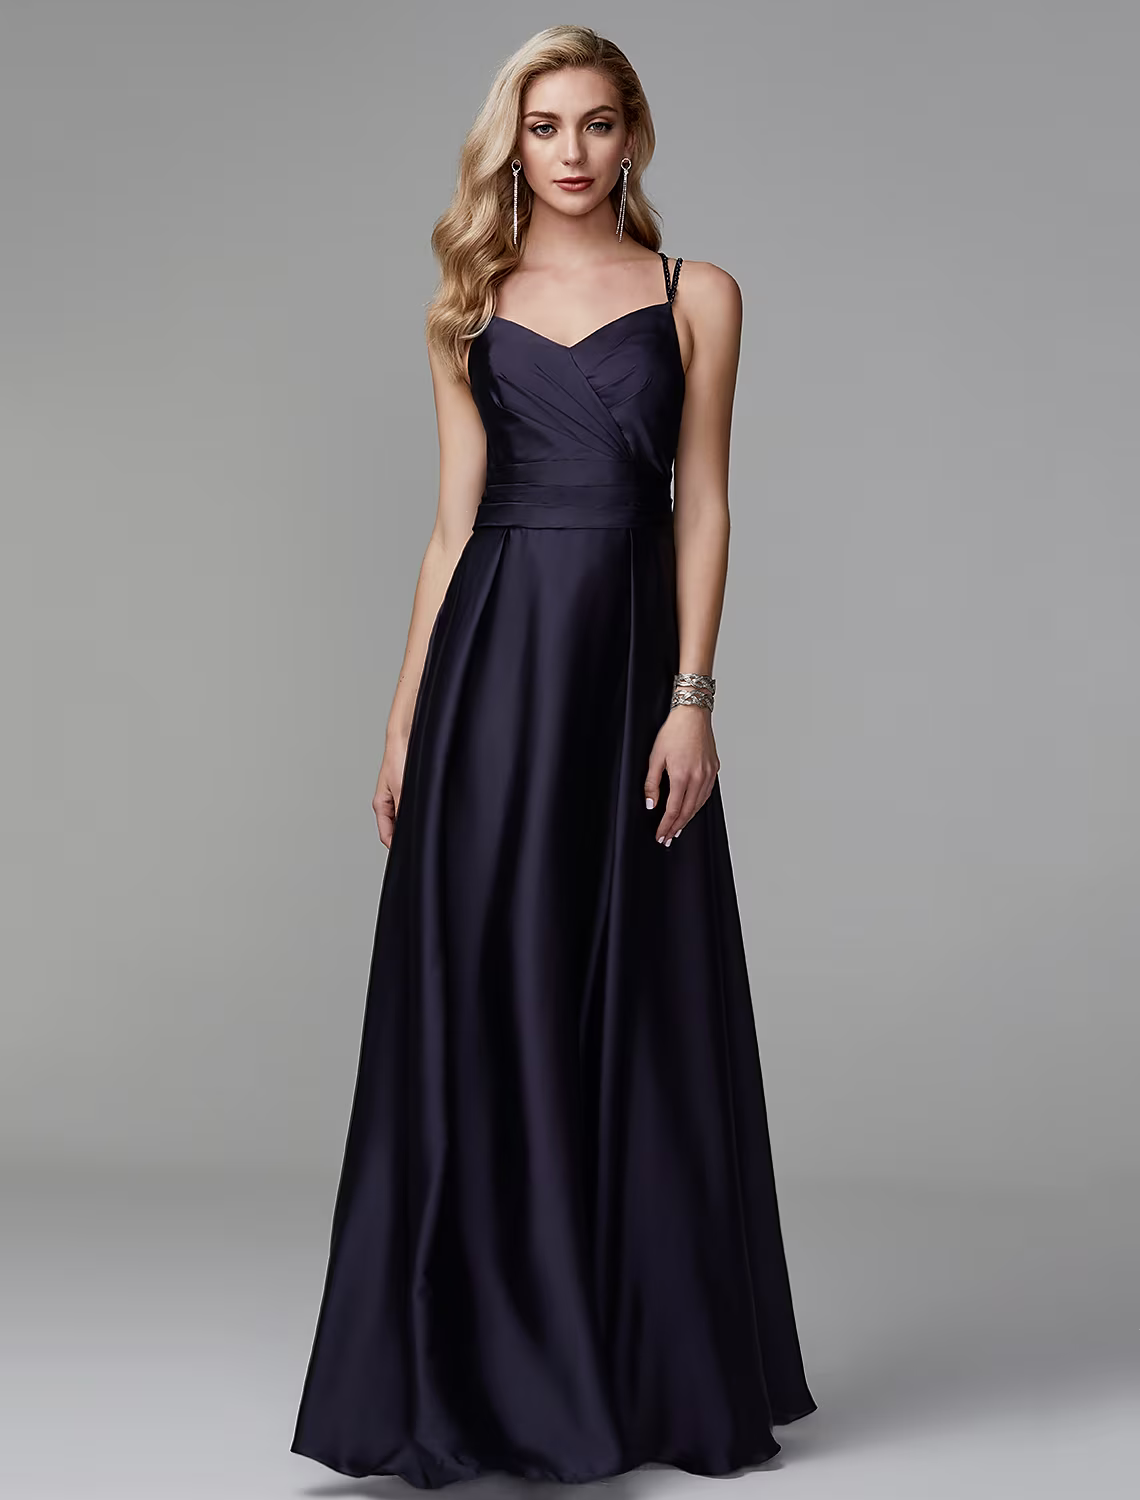 Evening Gown Dress Formal Floor Length Sleeveless V Neck Charmeuse Backless with Pleats Slit